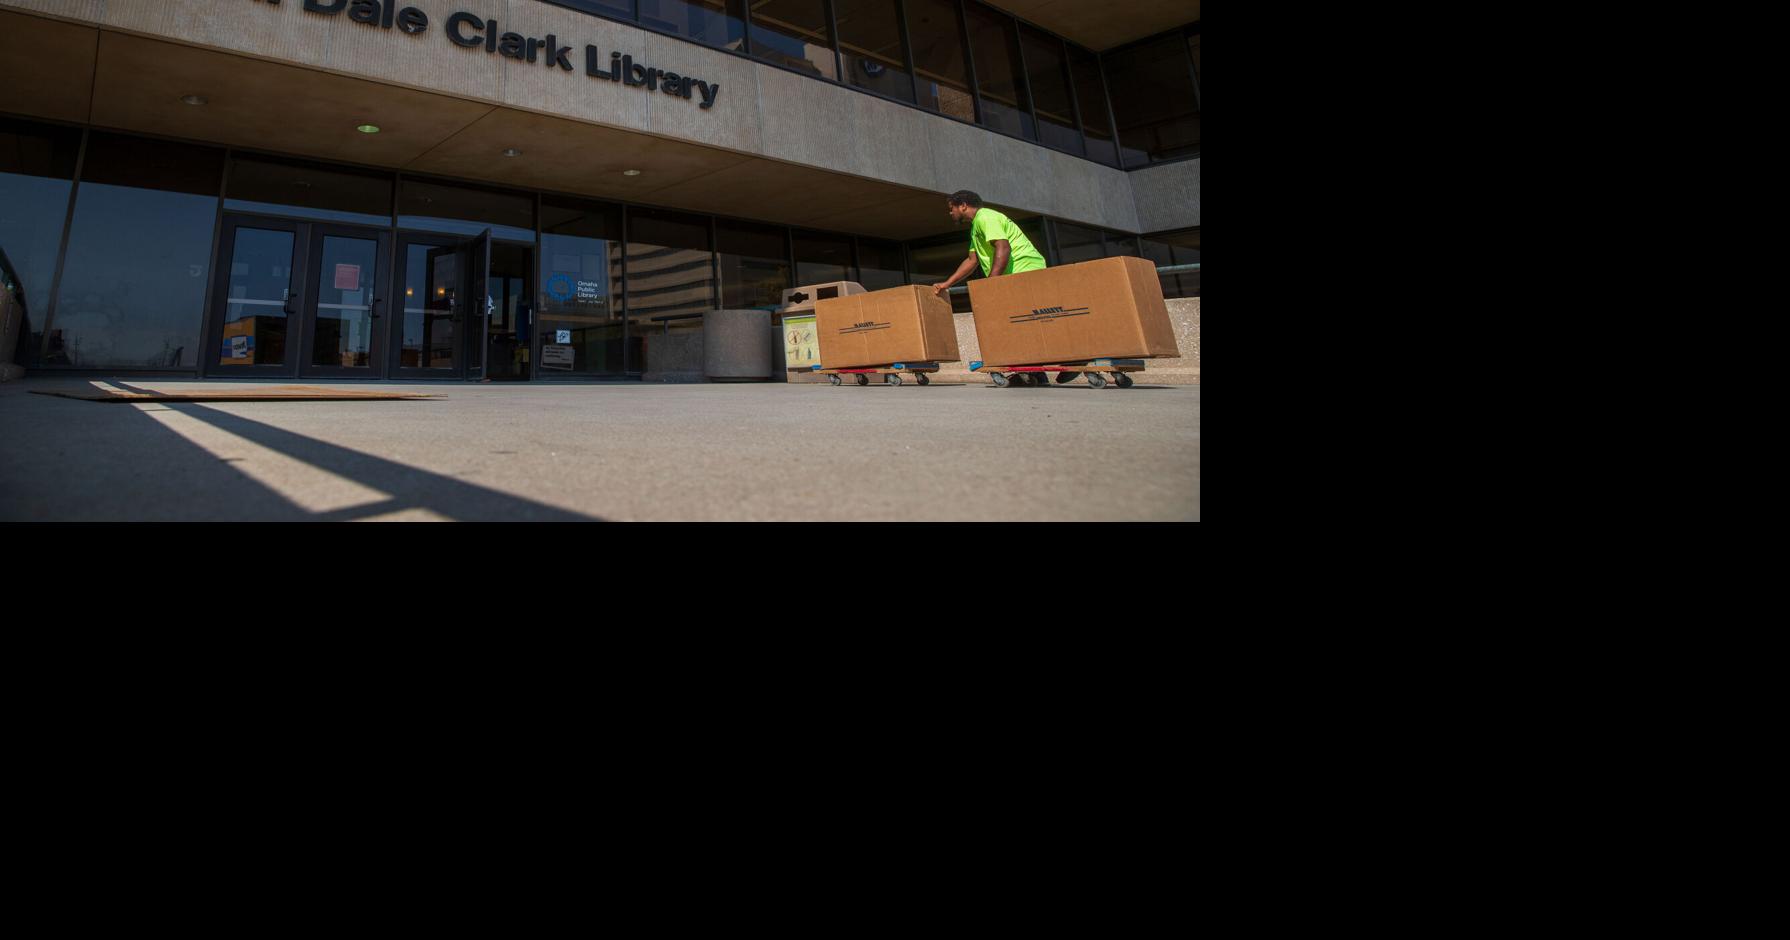 Omaha City Council to consider paying additional $400K to demolish downtown library